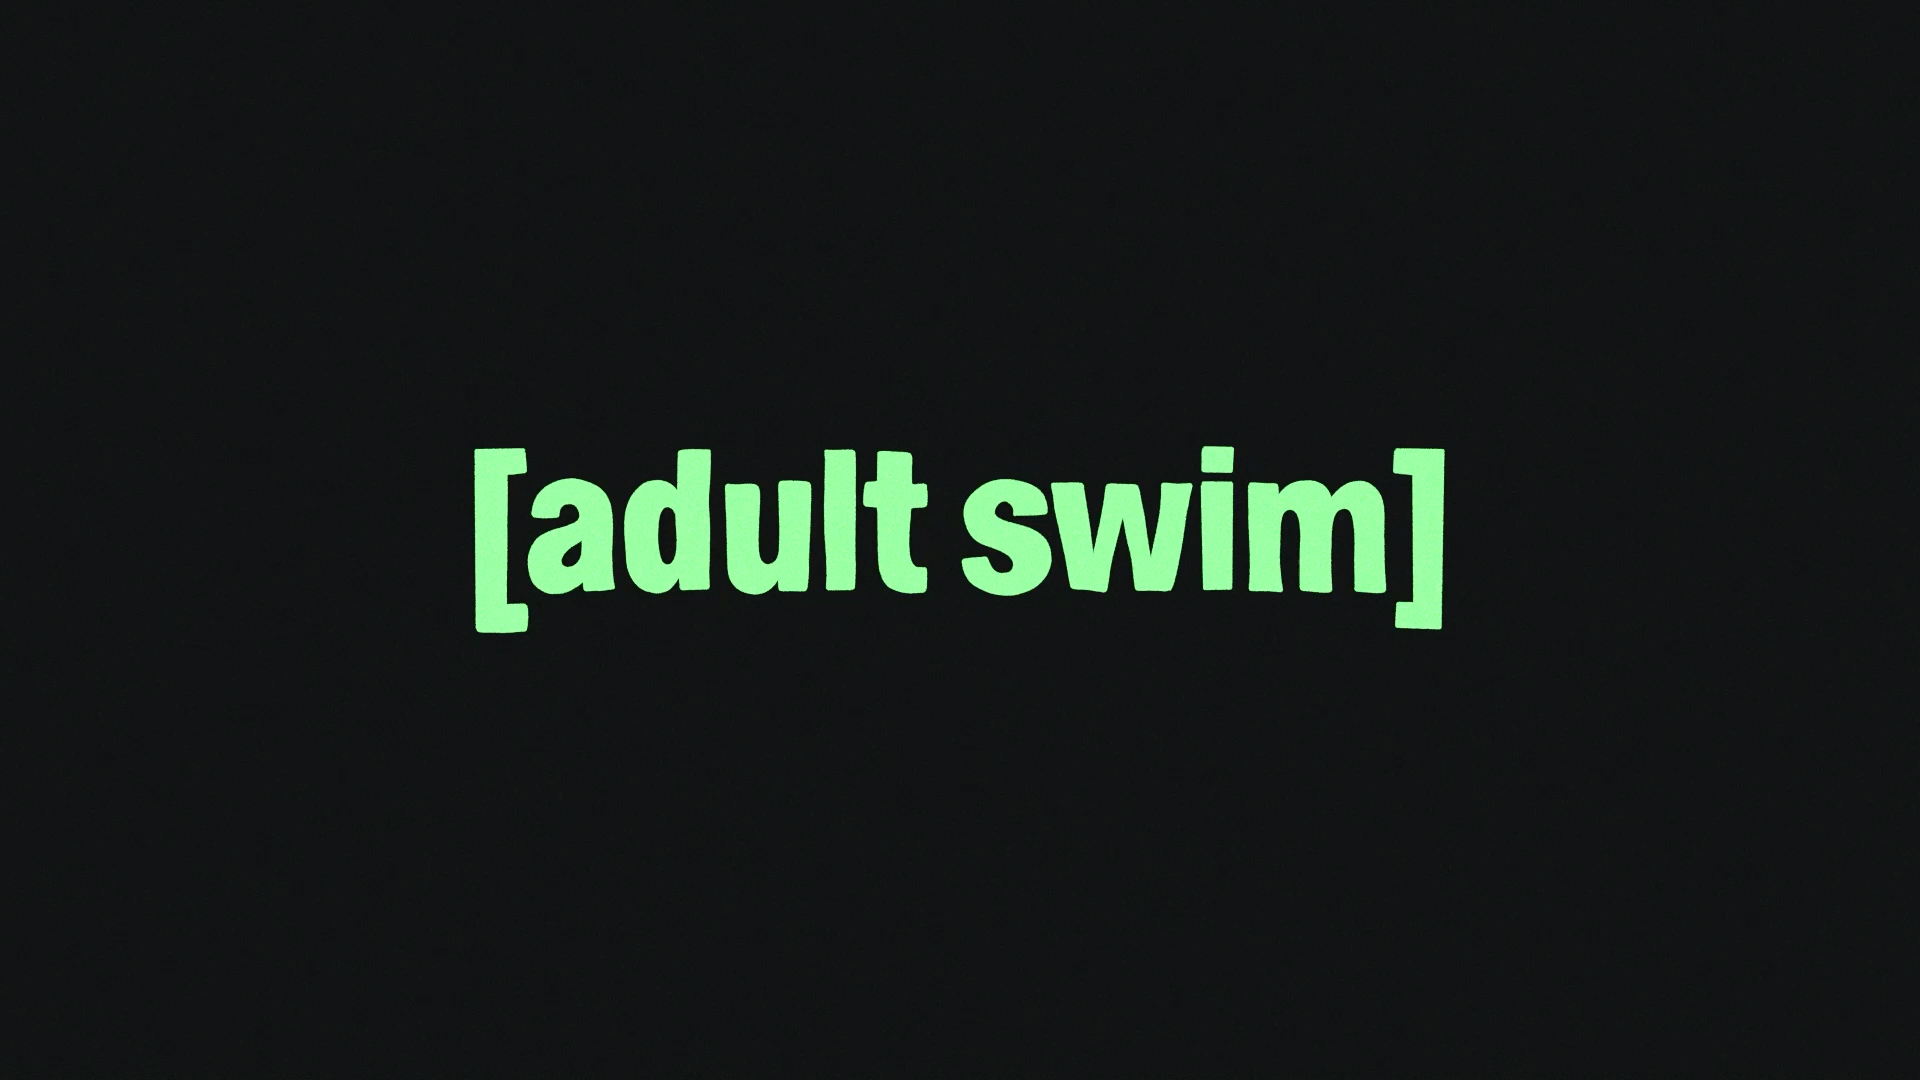 the words adult swim in square brackets